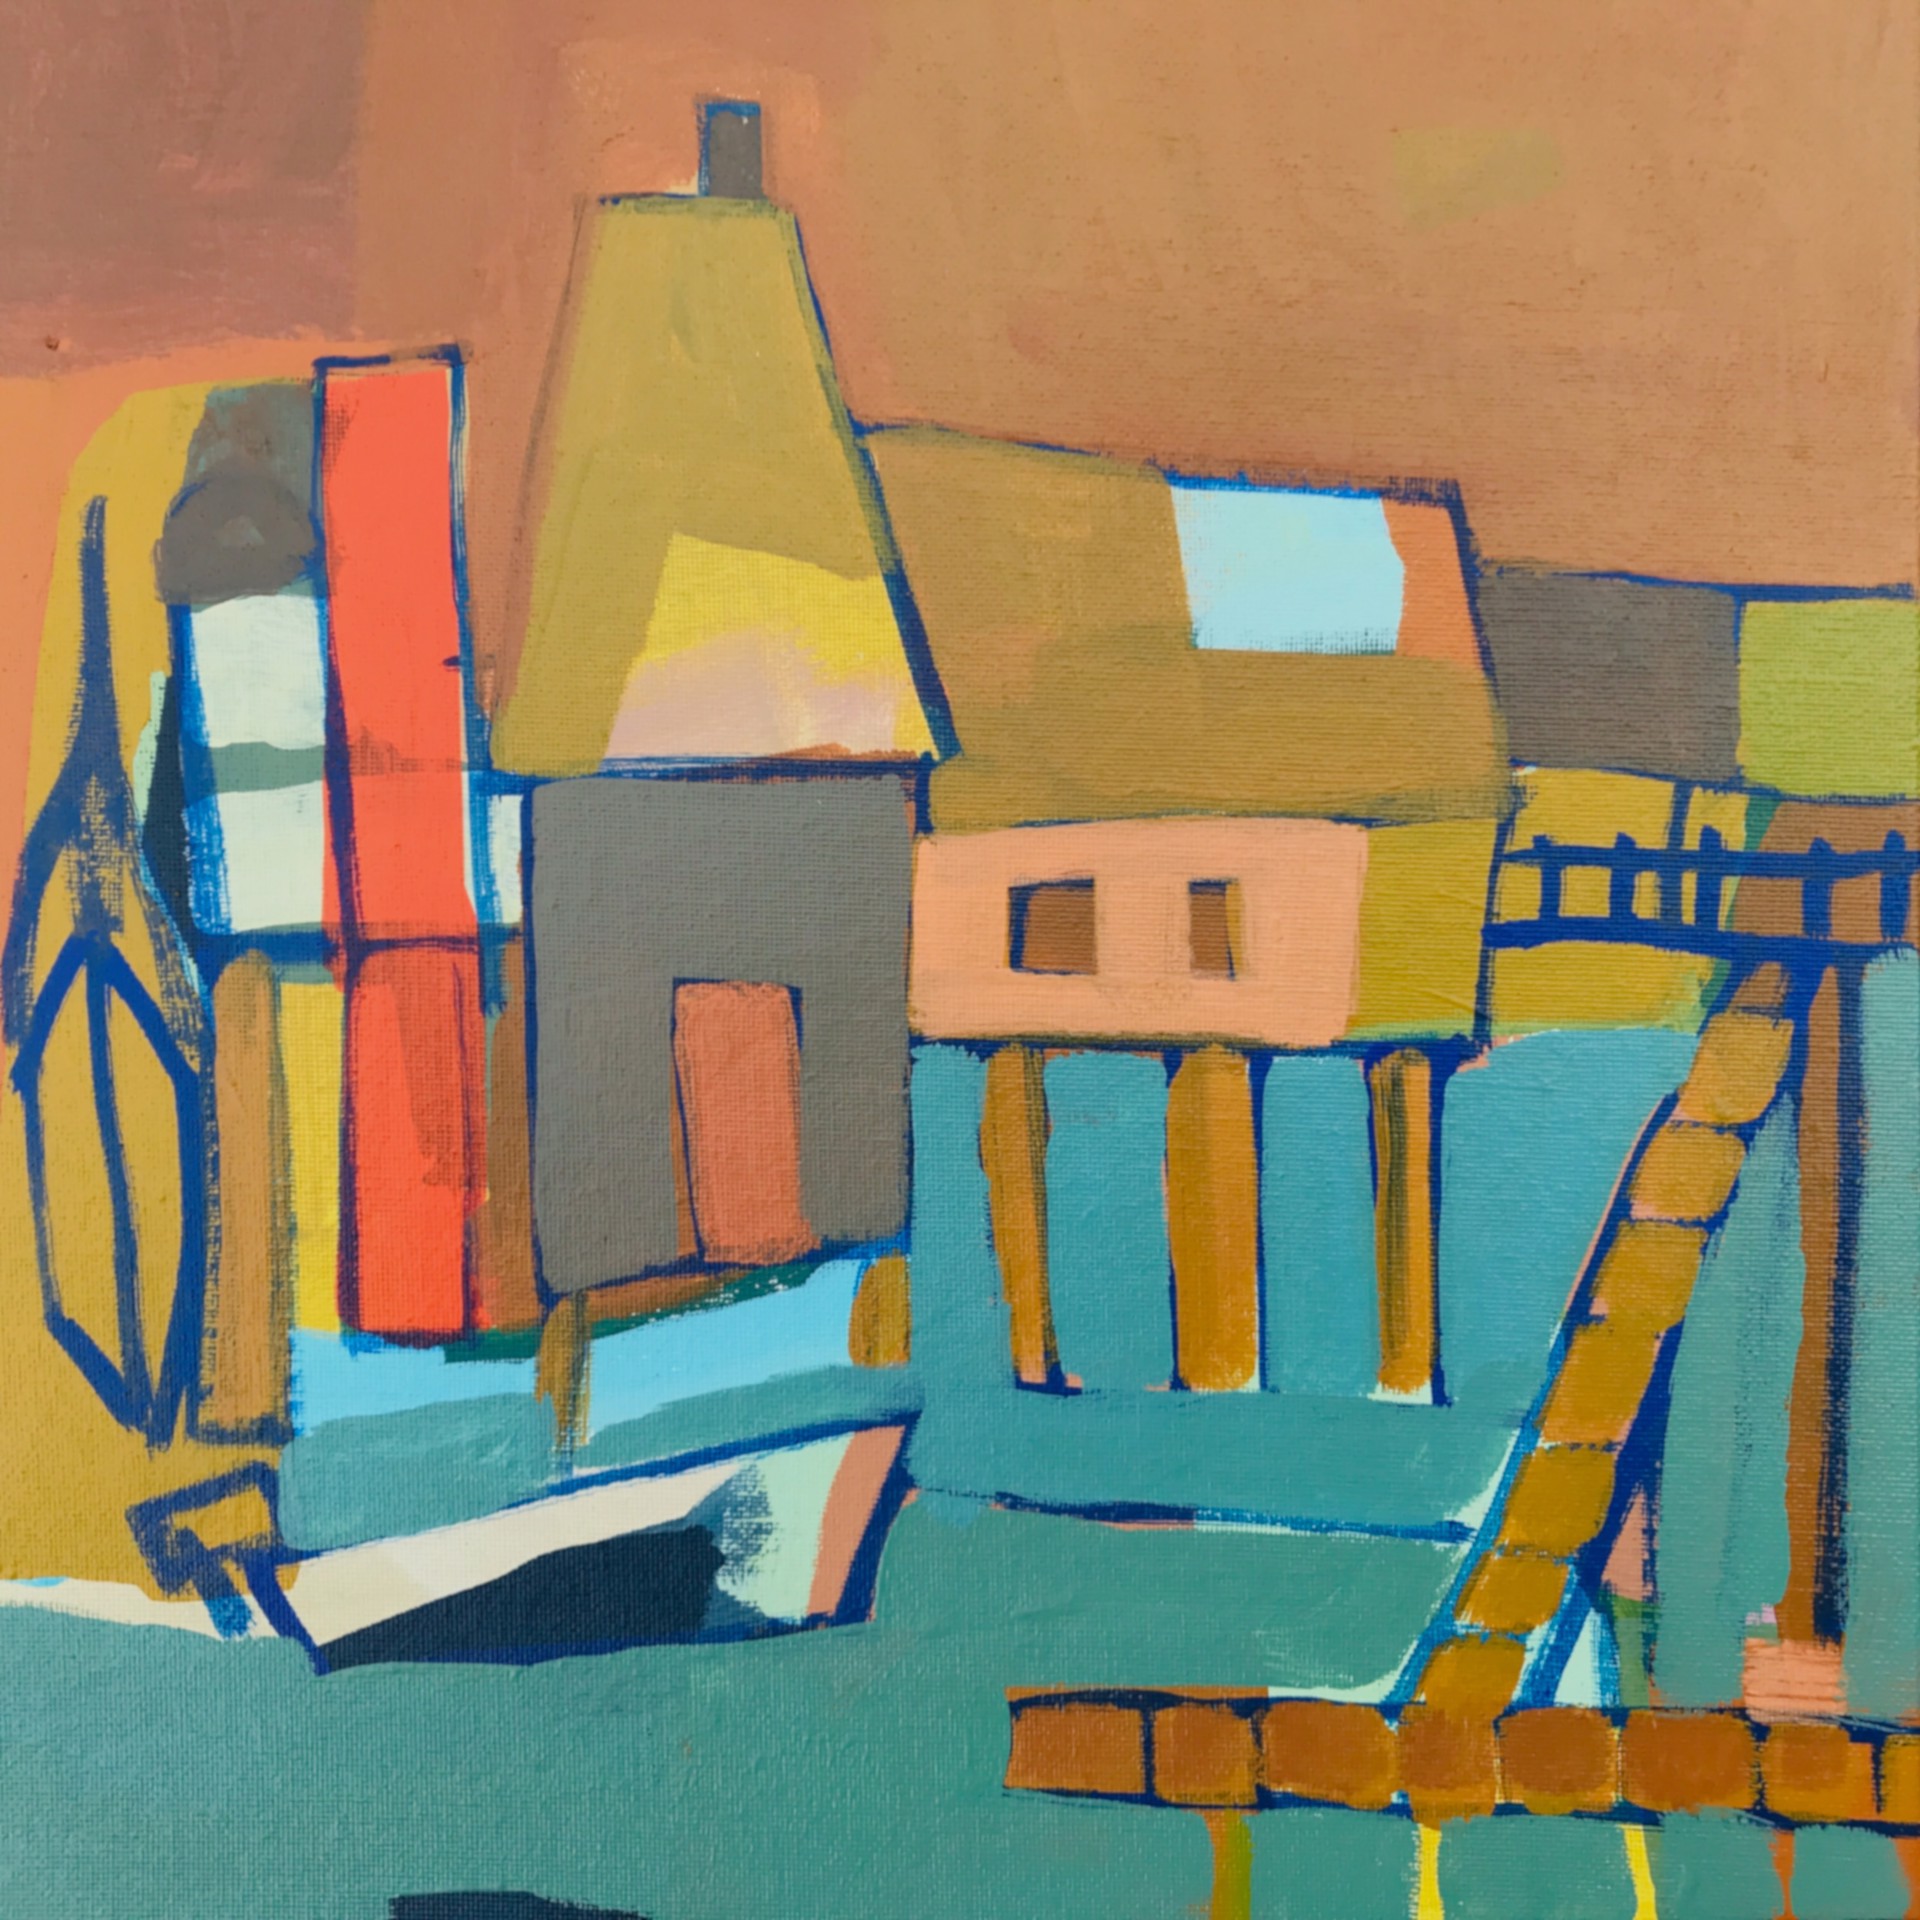 Fishing Village and Wooden Ramps by Rachael Van Dyke